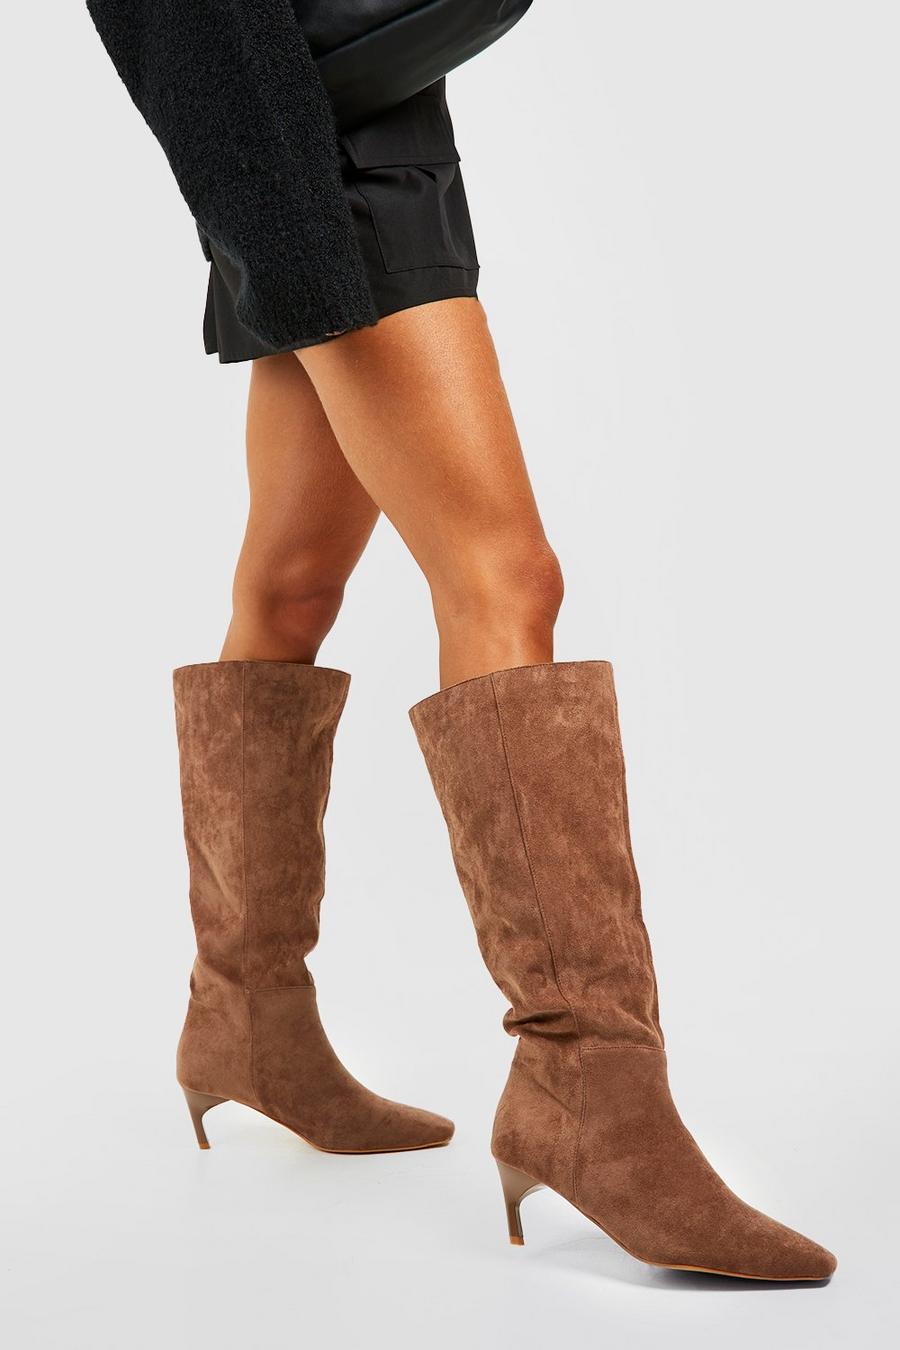 Mink Wide Width Low Square Toe Knee High Boots